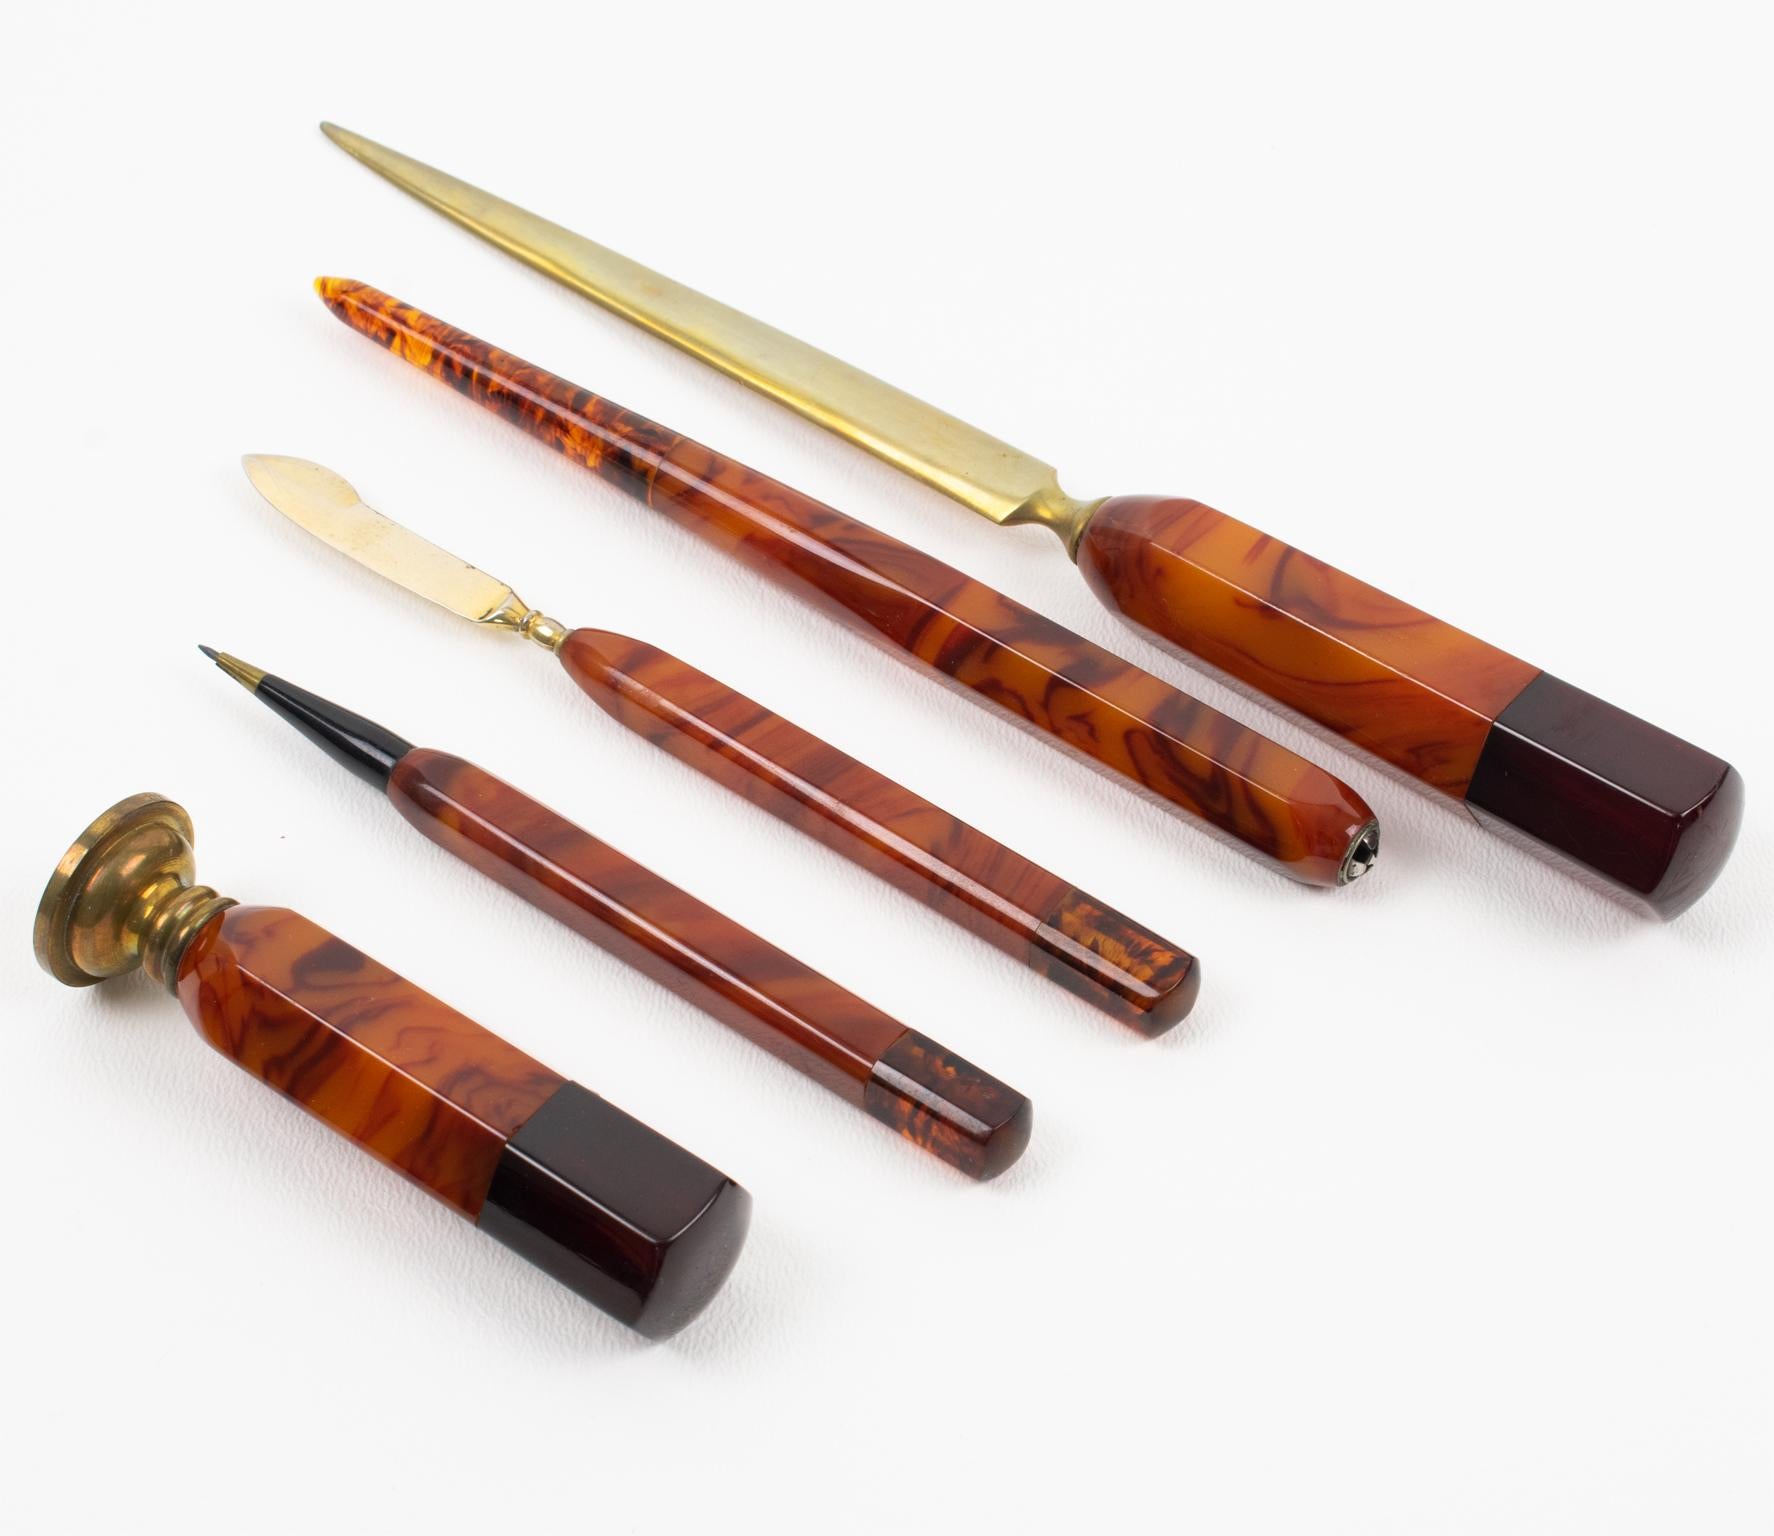 This stunning Art Deco Bakelite desk accessories writing set dates from the 1930s. The set is built of five pieces in its original box: a letter opener, paper cutter, pen holder, mechanical pencil, and wax stamp. Each piece is ornate with beautiful